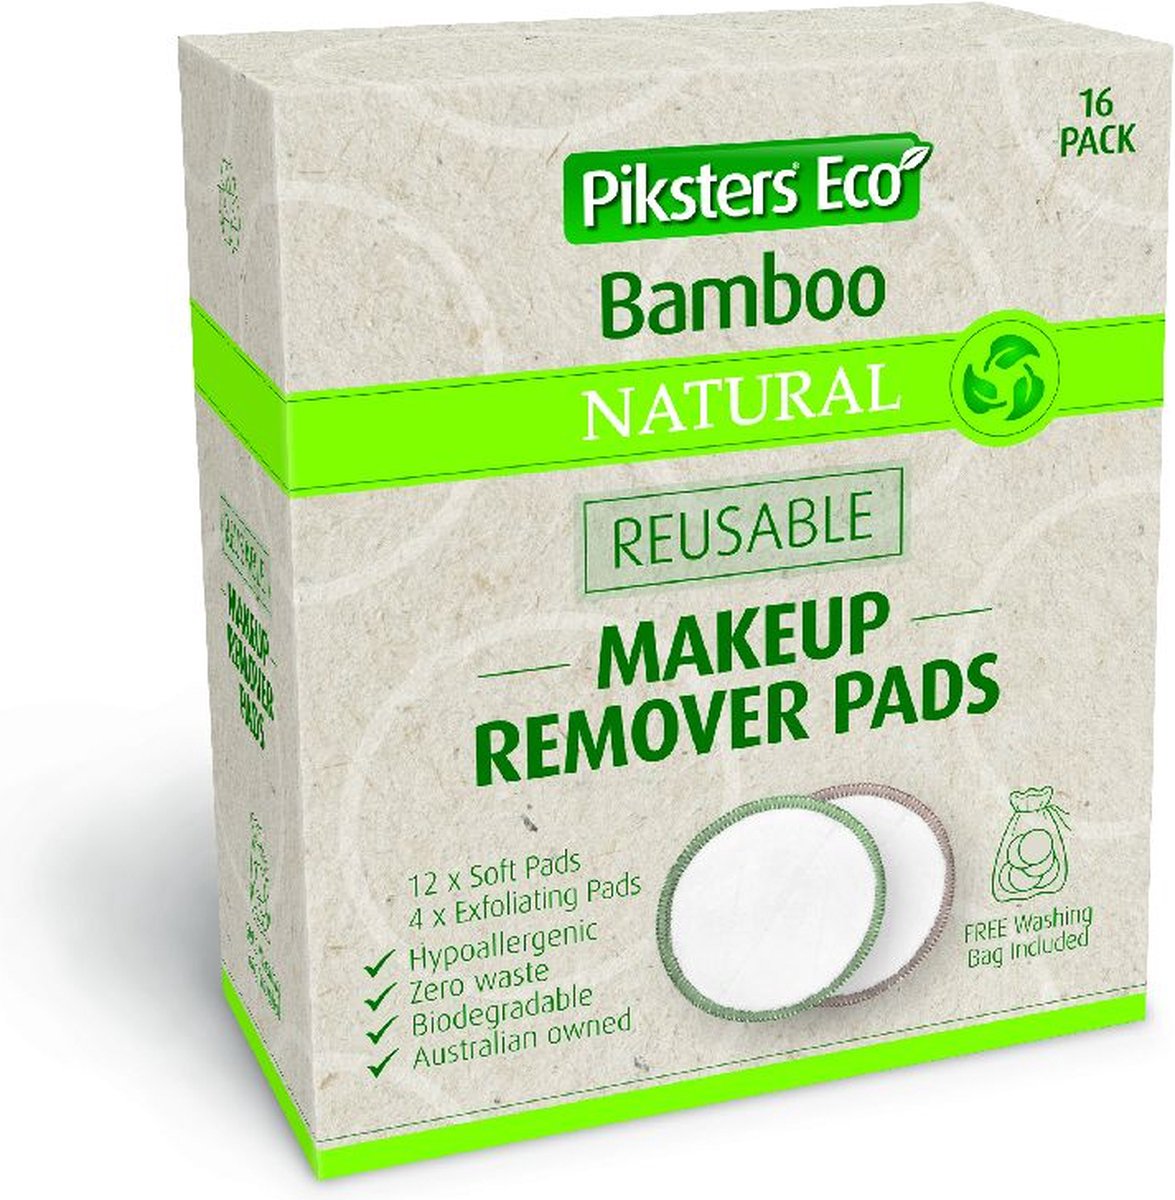 Piksters Eco - Herbruikbare Make-Up Remover Pads - Bamboo - Inclusief Waszak